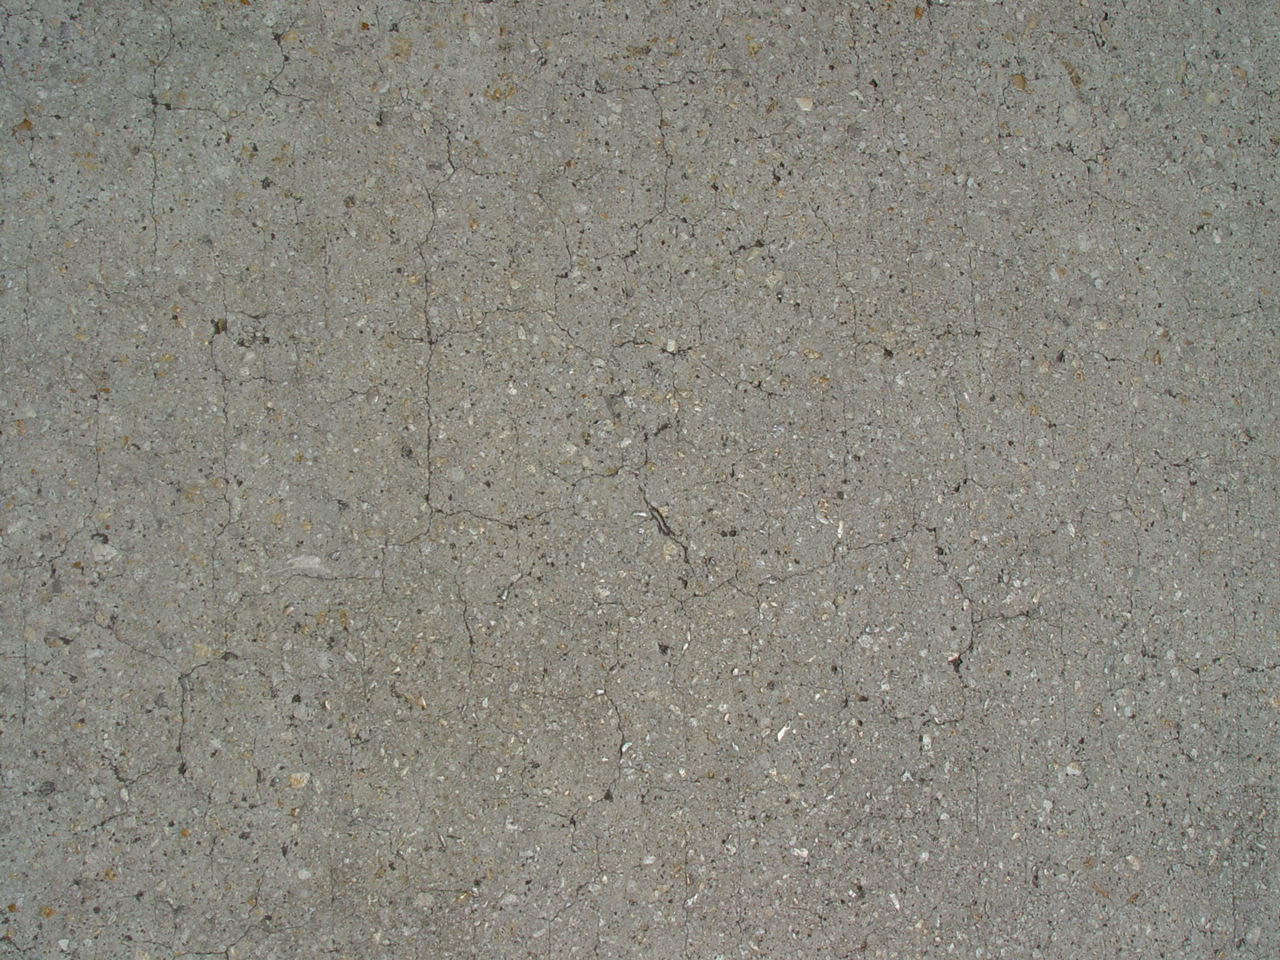 Cement Road Texture